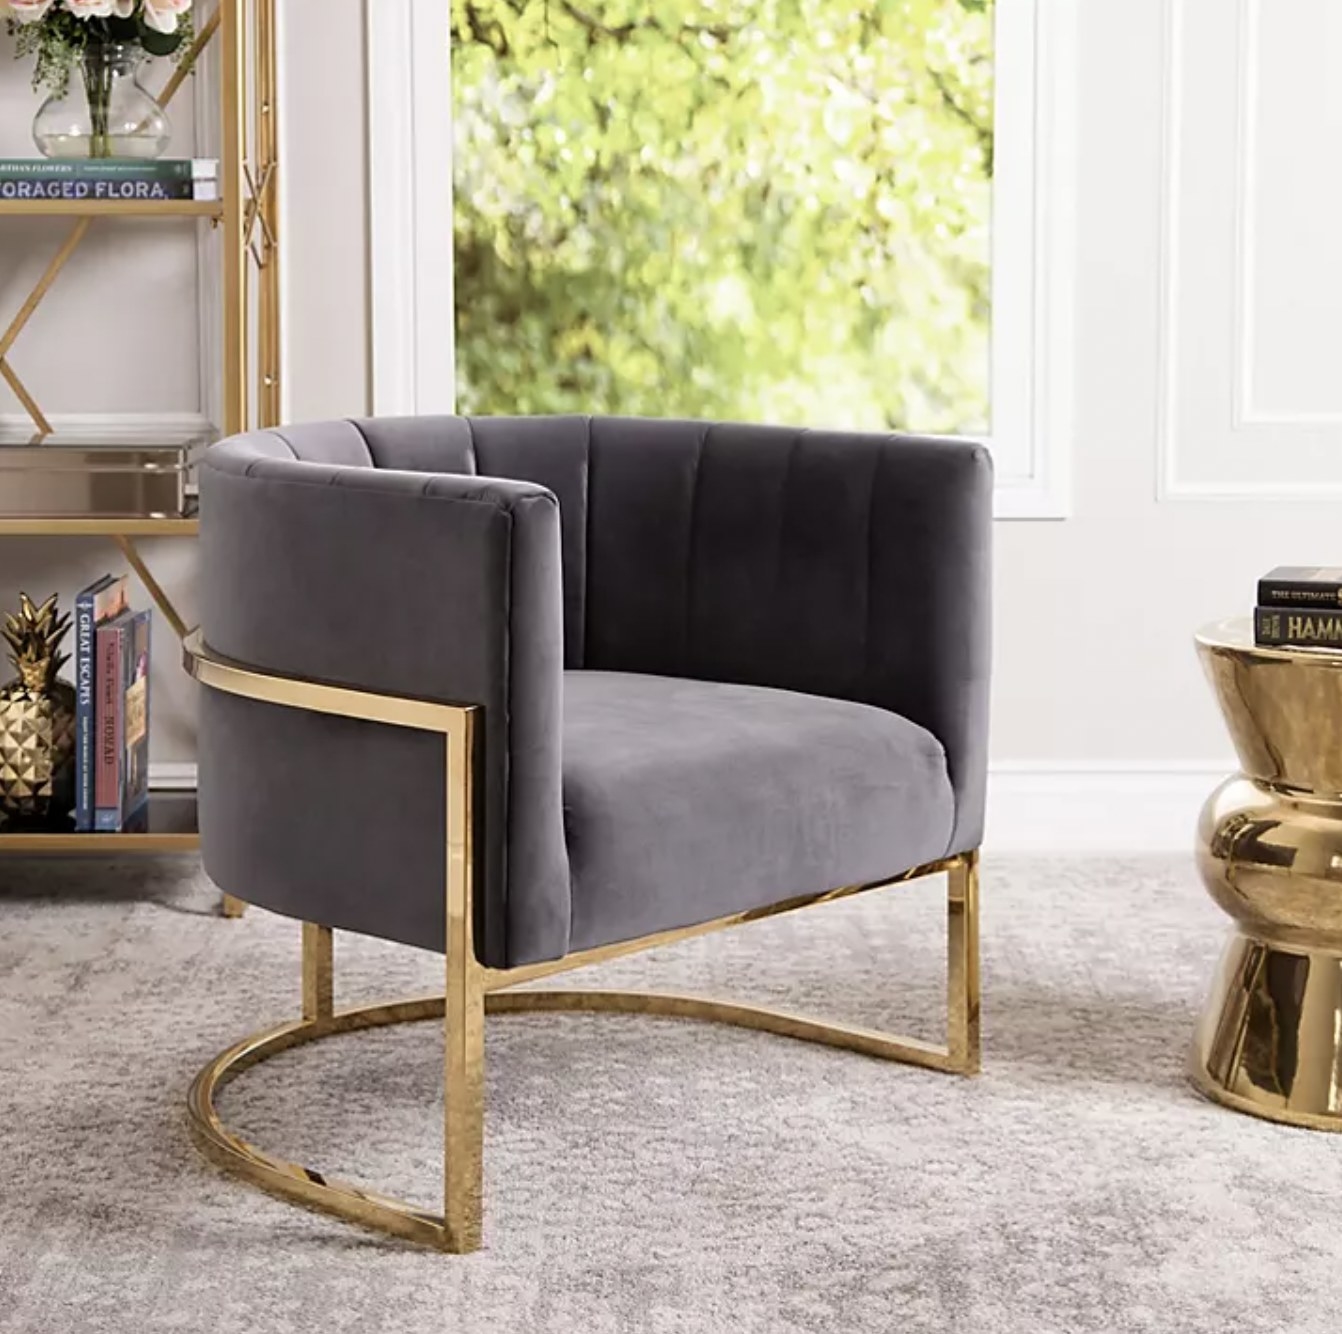 The velvet half-circular chair with gold base